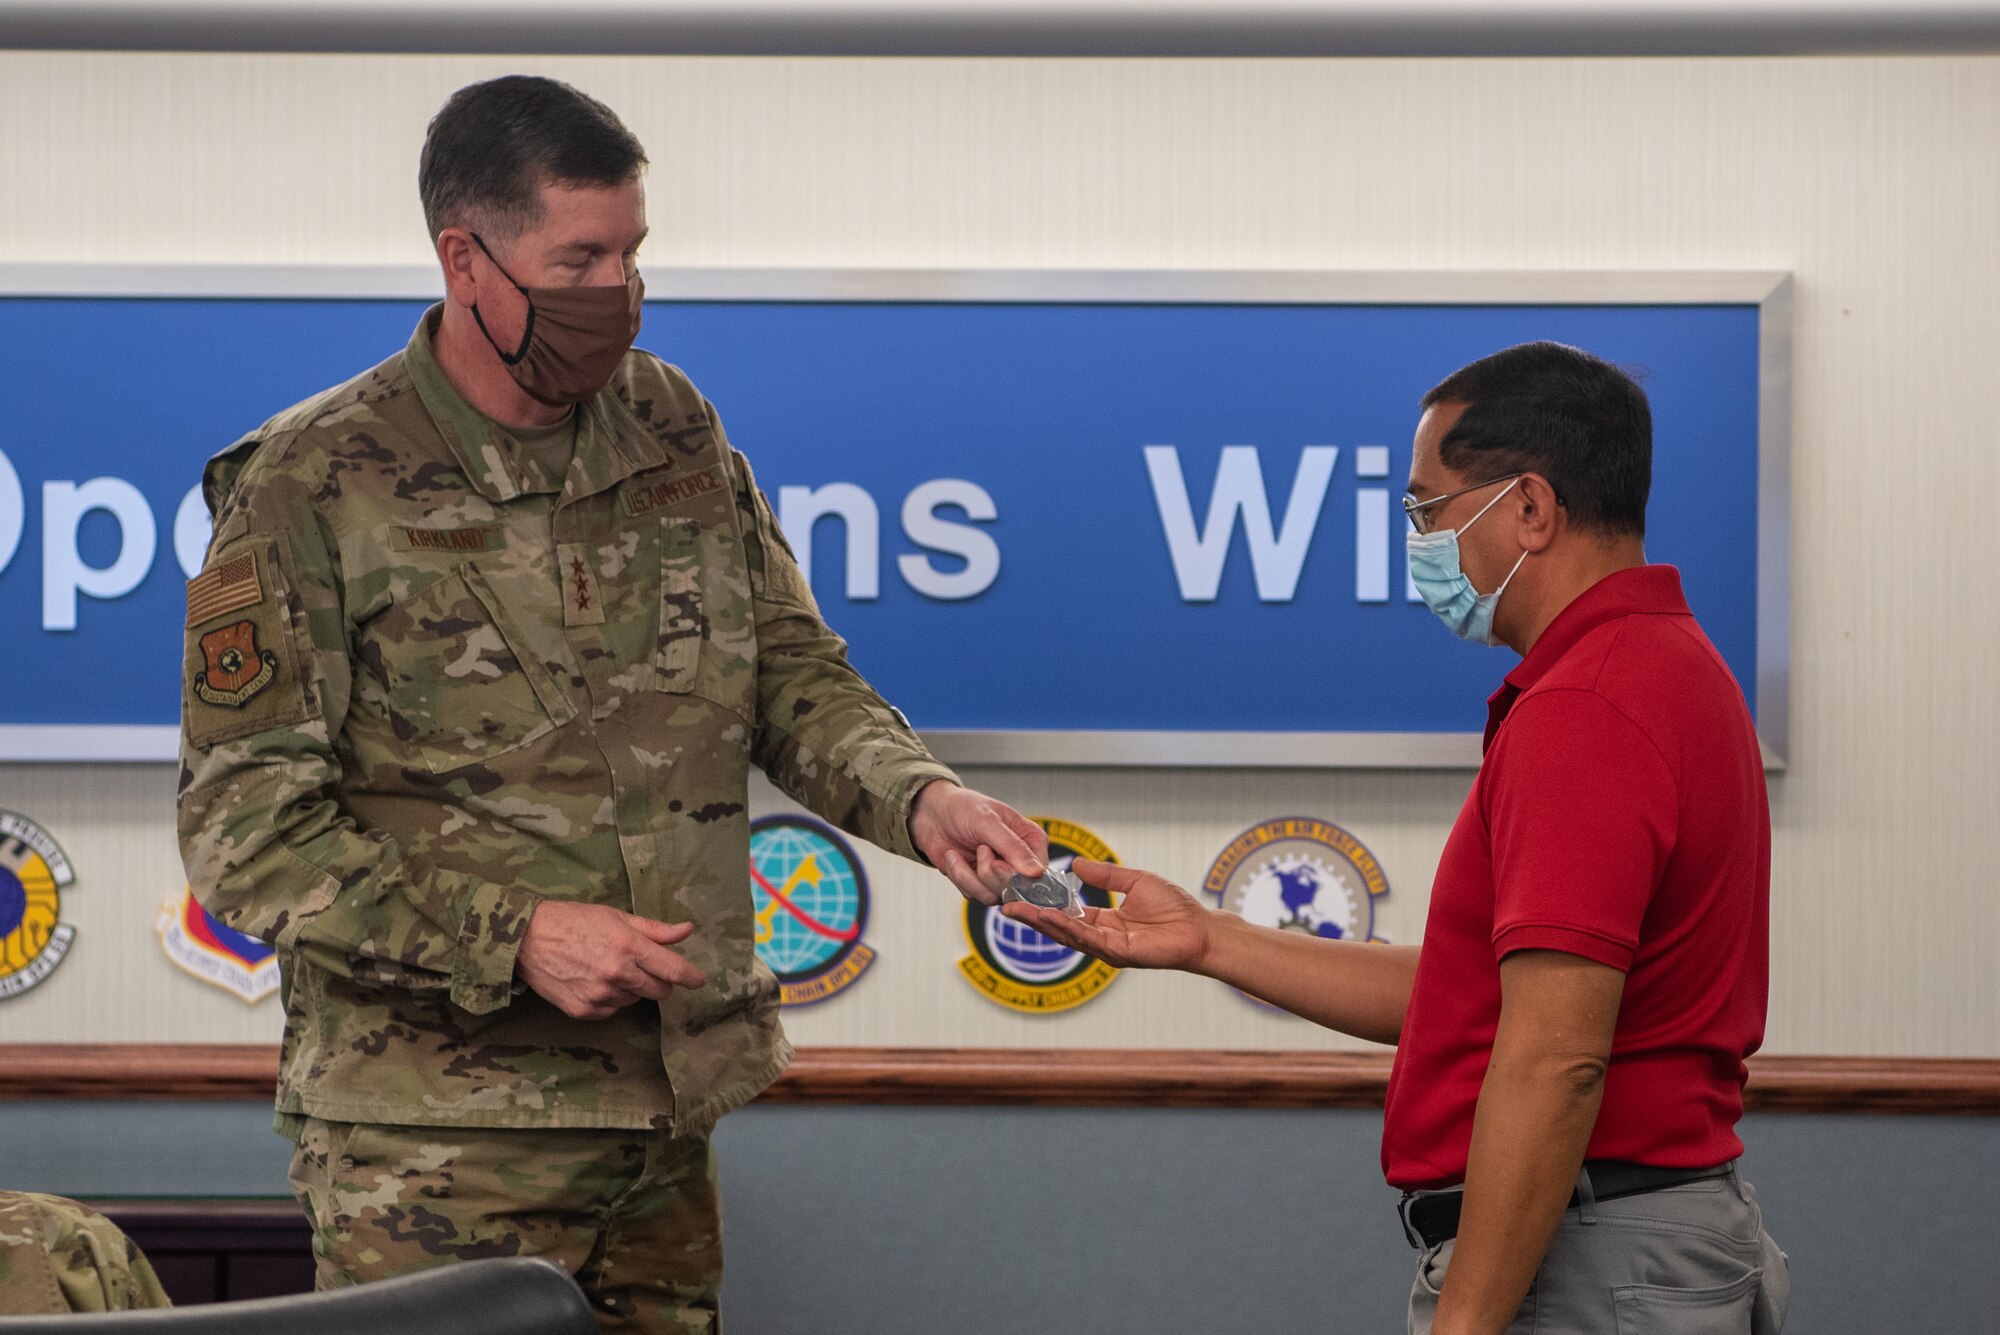 Gary Borges, Technical Support senior technician with the 437th Supply Chain Operations Squadron receives a coin from Air Force Lt. Gen. Gene Kirkland, Air Force Sustainment Center commander on Oct. 19.